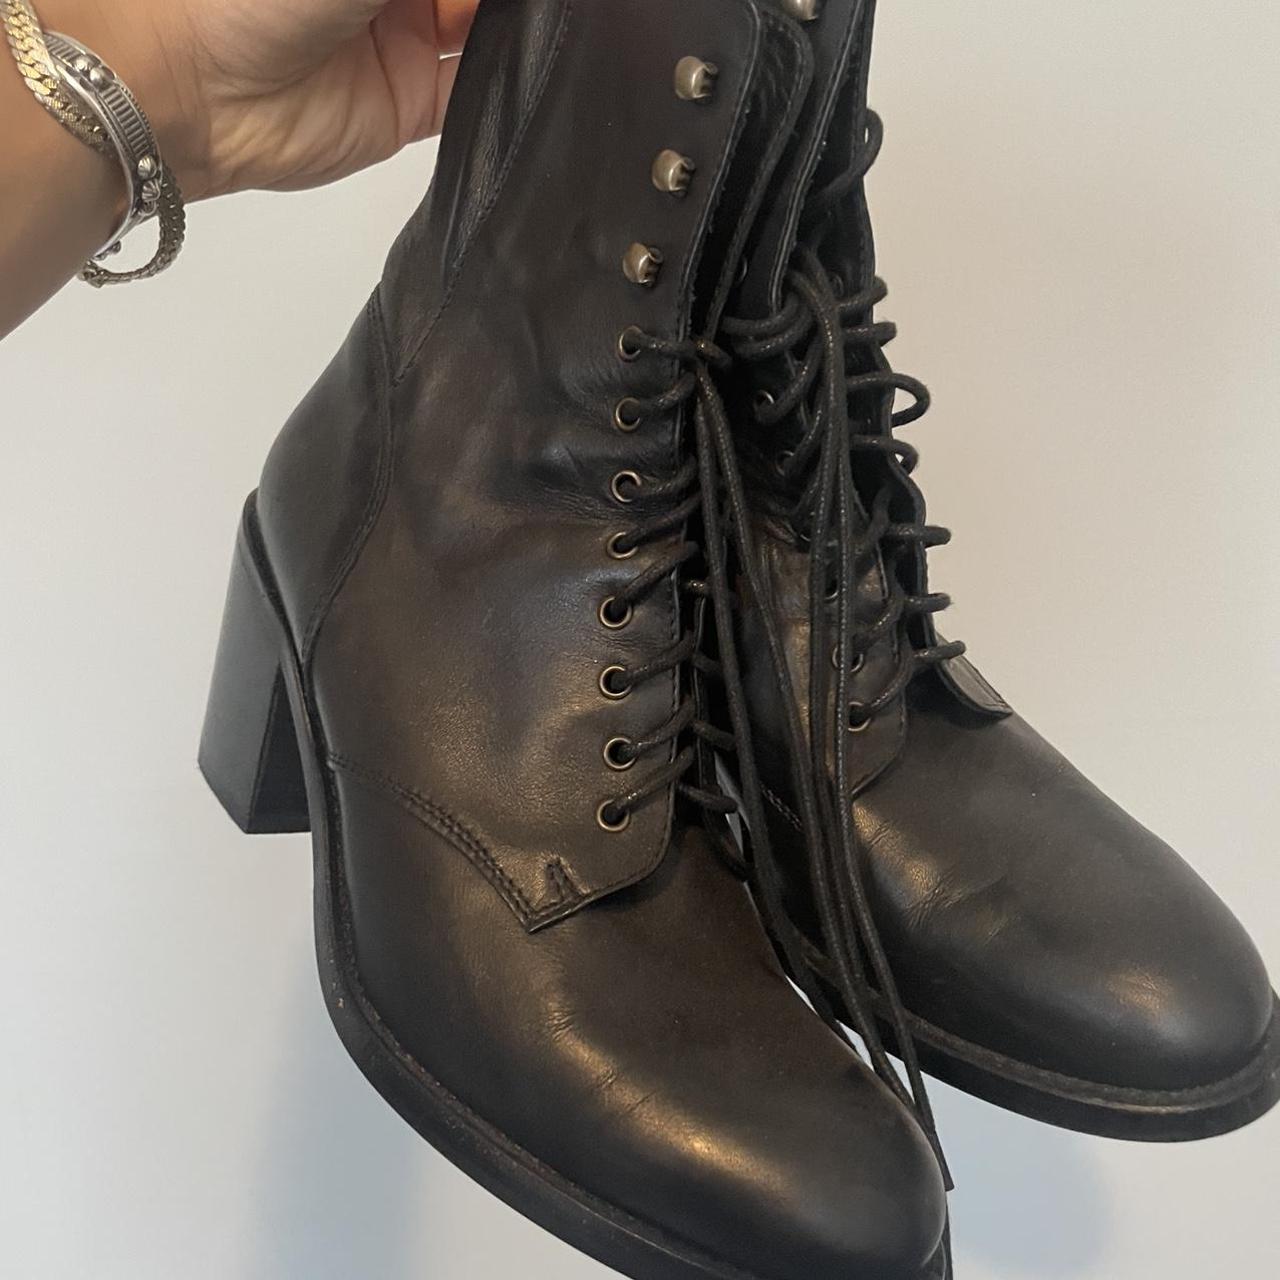 Product Image 1 - BELSTAFF LEATHER ENGLAND BOOTS

made in